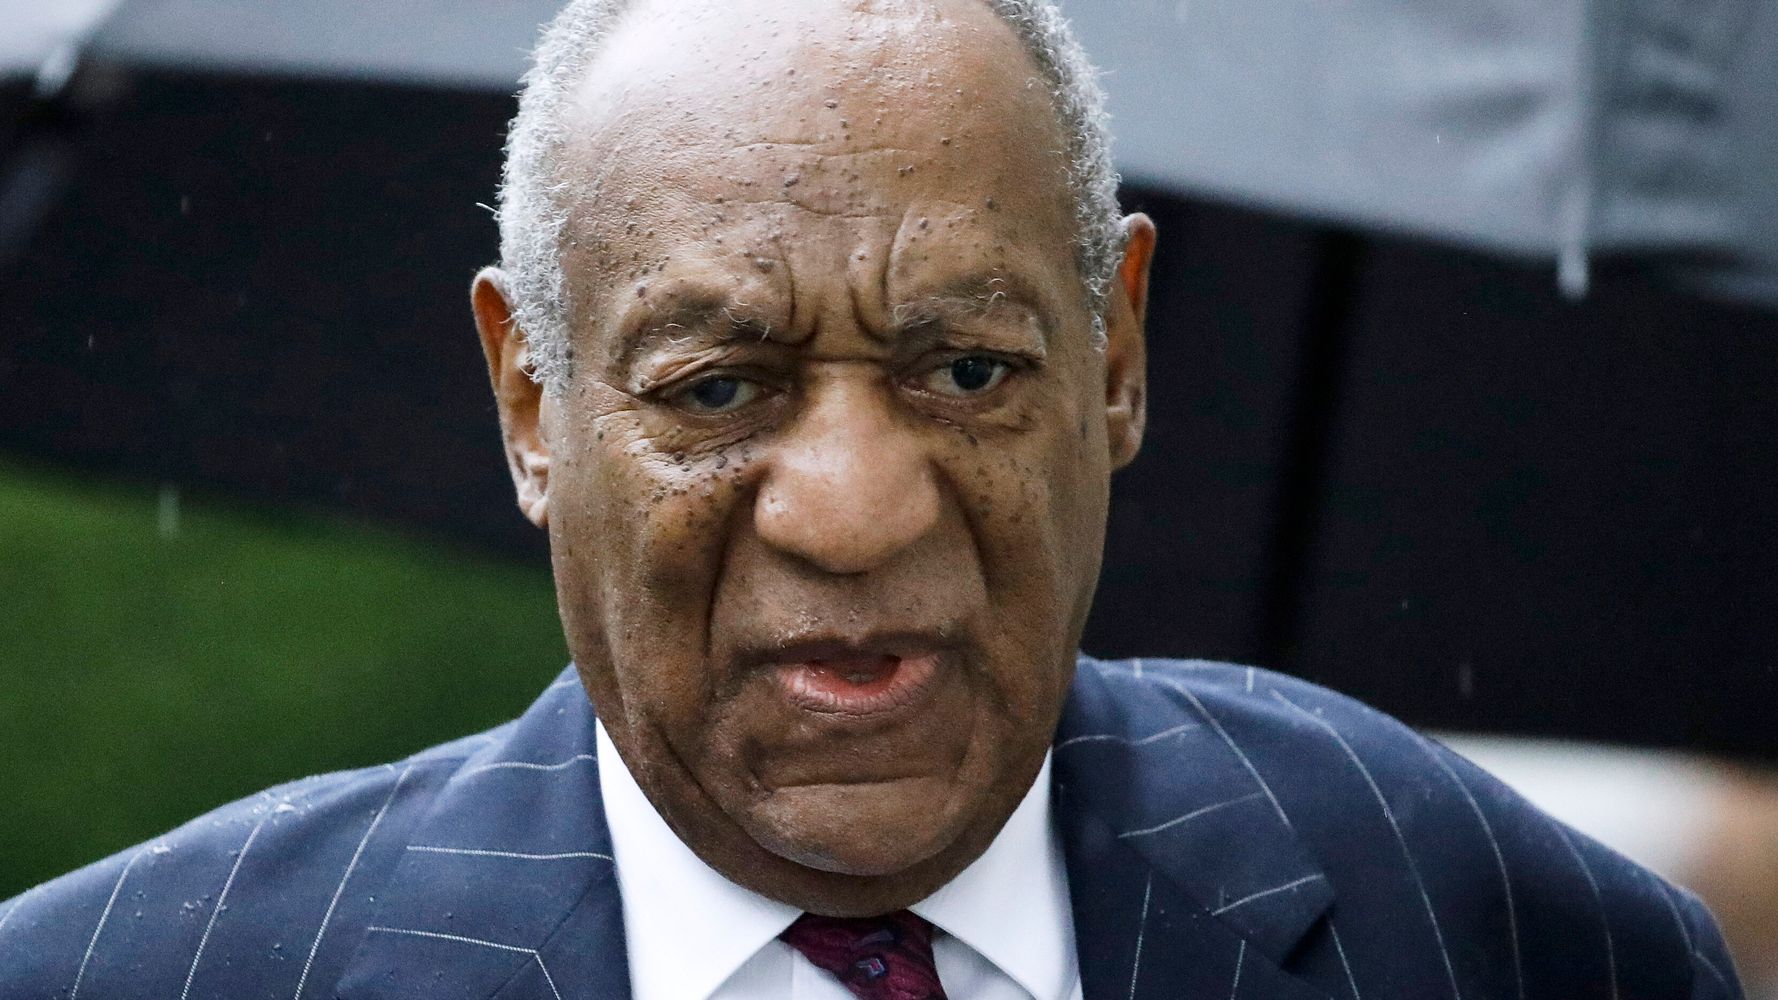 Bill Cosby Faces Sex Abuse Allegations Again As Civil Trial Opens